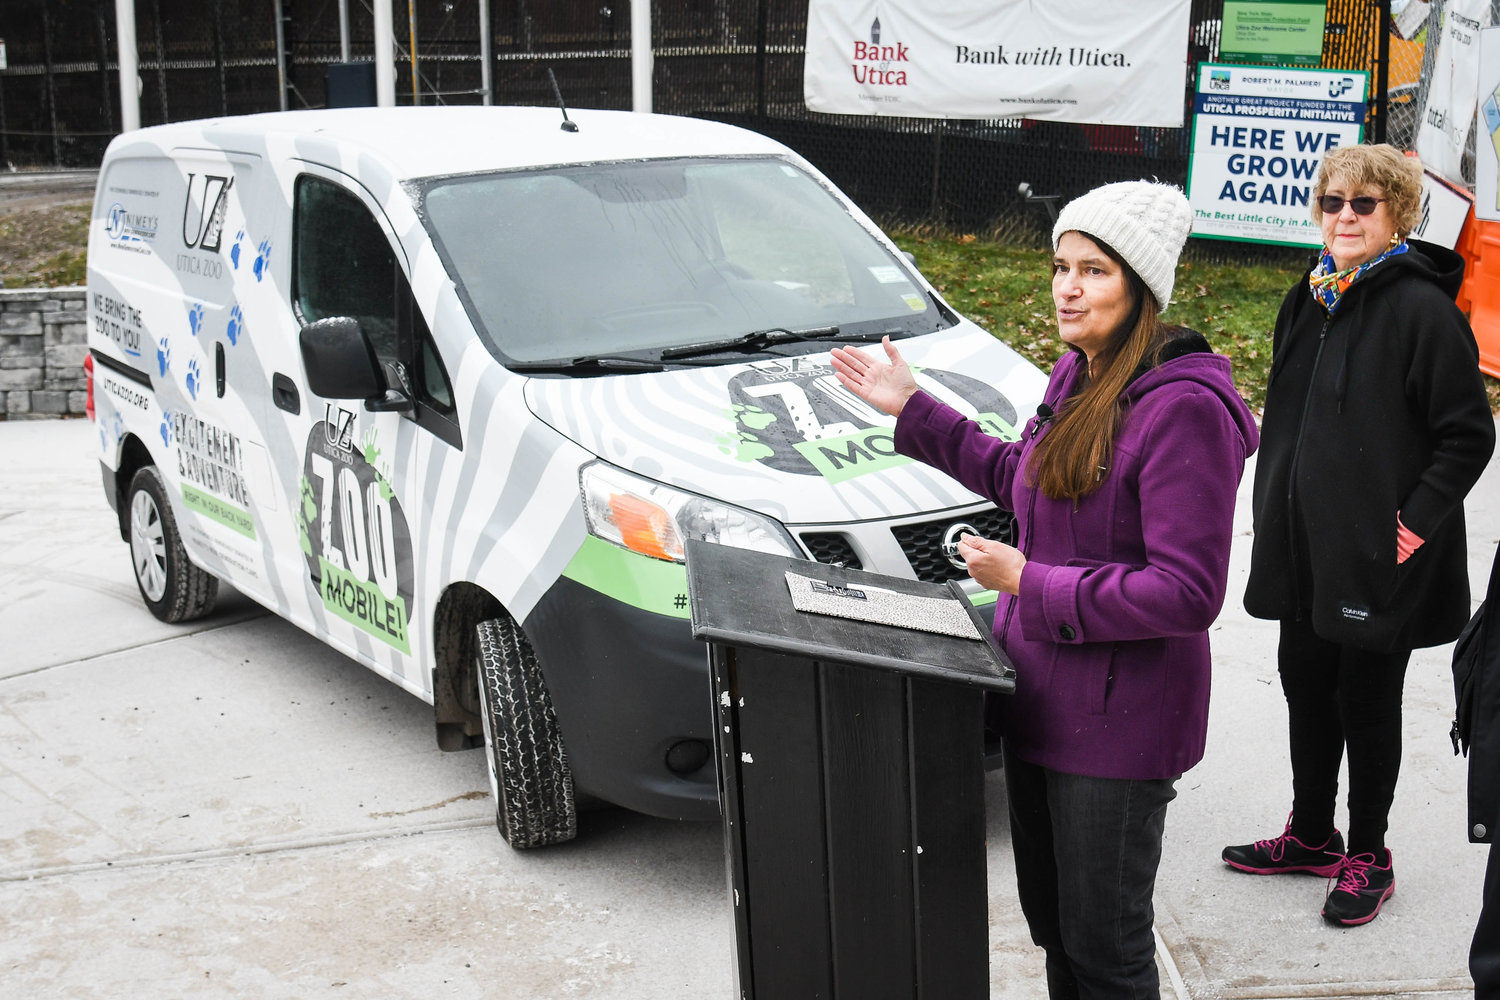 Andria Heath, executive director of the Utica Zoo, unveiled a new ZooMobile during a press conference at the popular local attraction on Monday, Jan. 9. The second ZooMobile was added thanks to a donation by Nimey’s New Generation Cars. Nimey’s recently presented the vehicle to the Utica Zoo, a 2015 Nissan transport van and the vehicle wrap, designed by McGrogan Design and installed by Valley Signs. The new ZooMobile will be used to offer additional programs, presentations, Heath said. It comes with more space and will also be used to help transport smaller animals when needed in and out of the zoo.